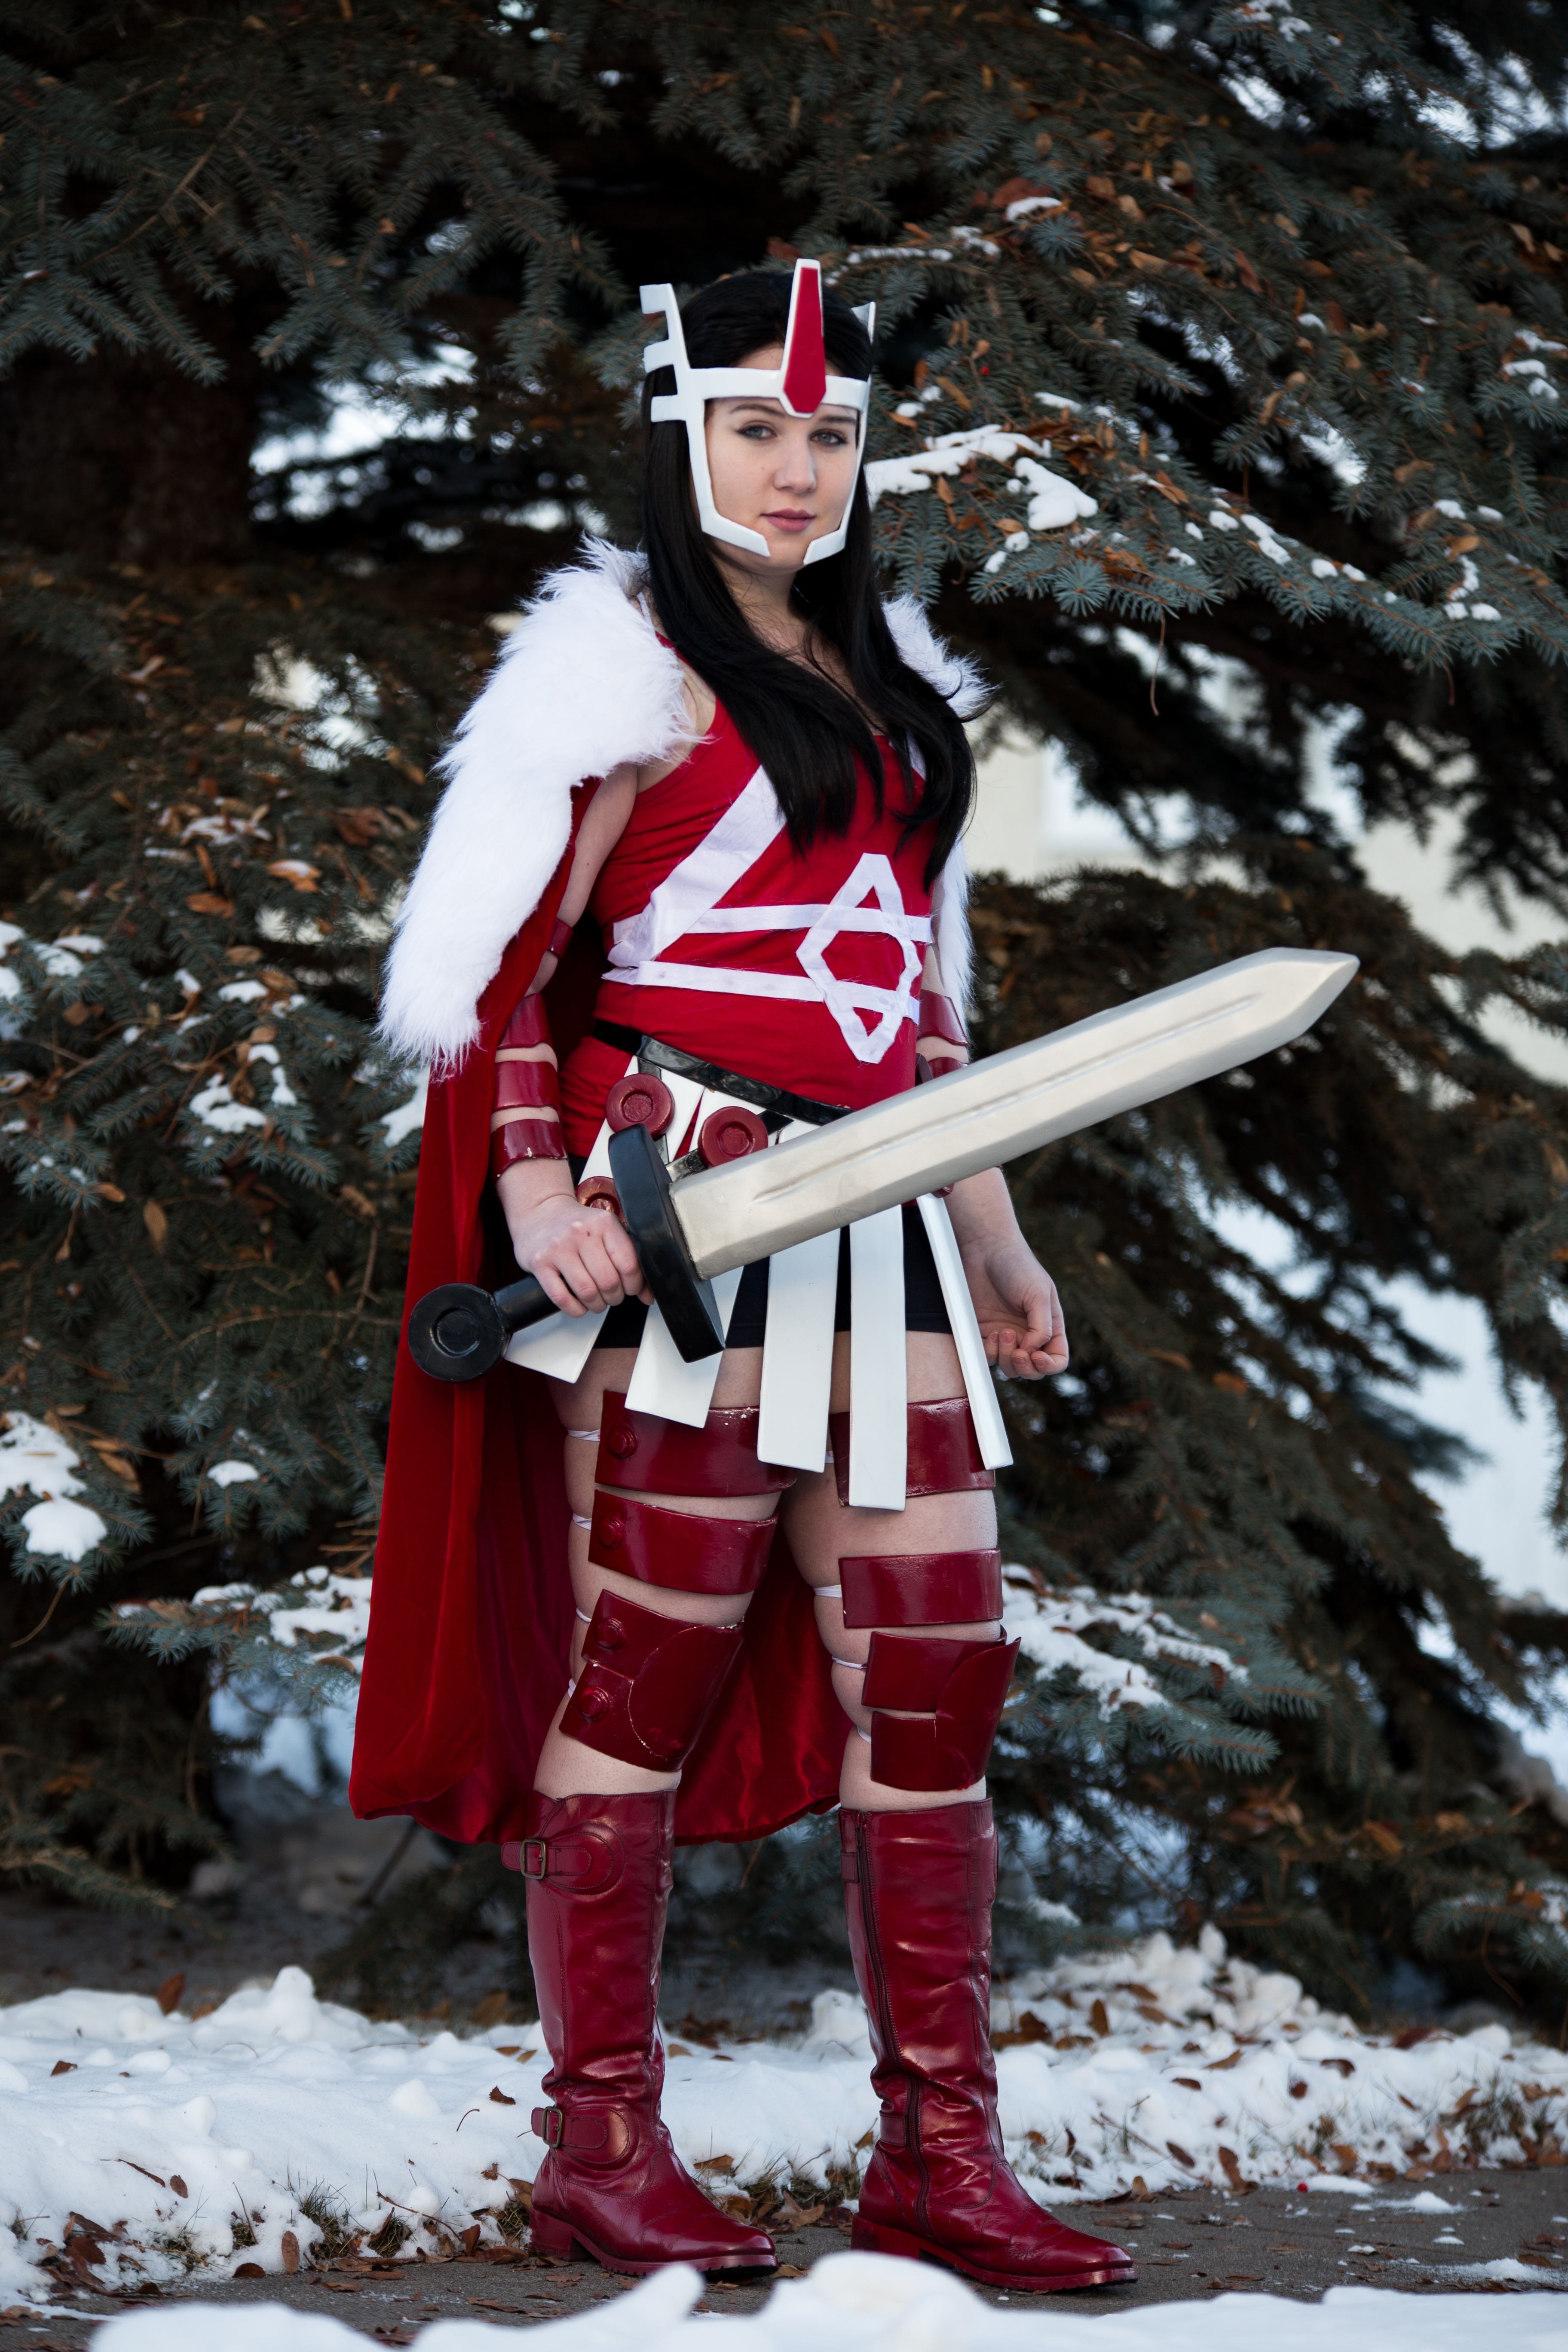 EXPRESS YOURSELF - Felicia McComb embodies the attitude of her character Lady Sif from the Thor comic series as a tough girl who is ready for anything.